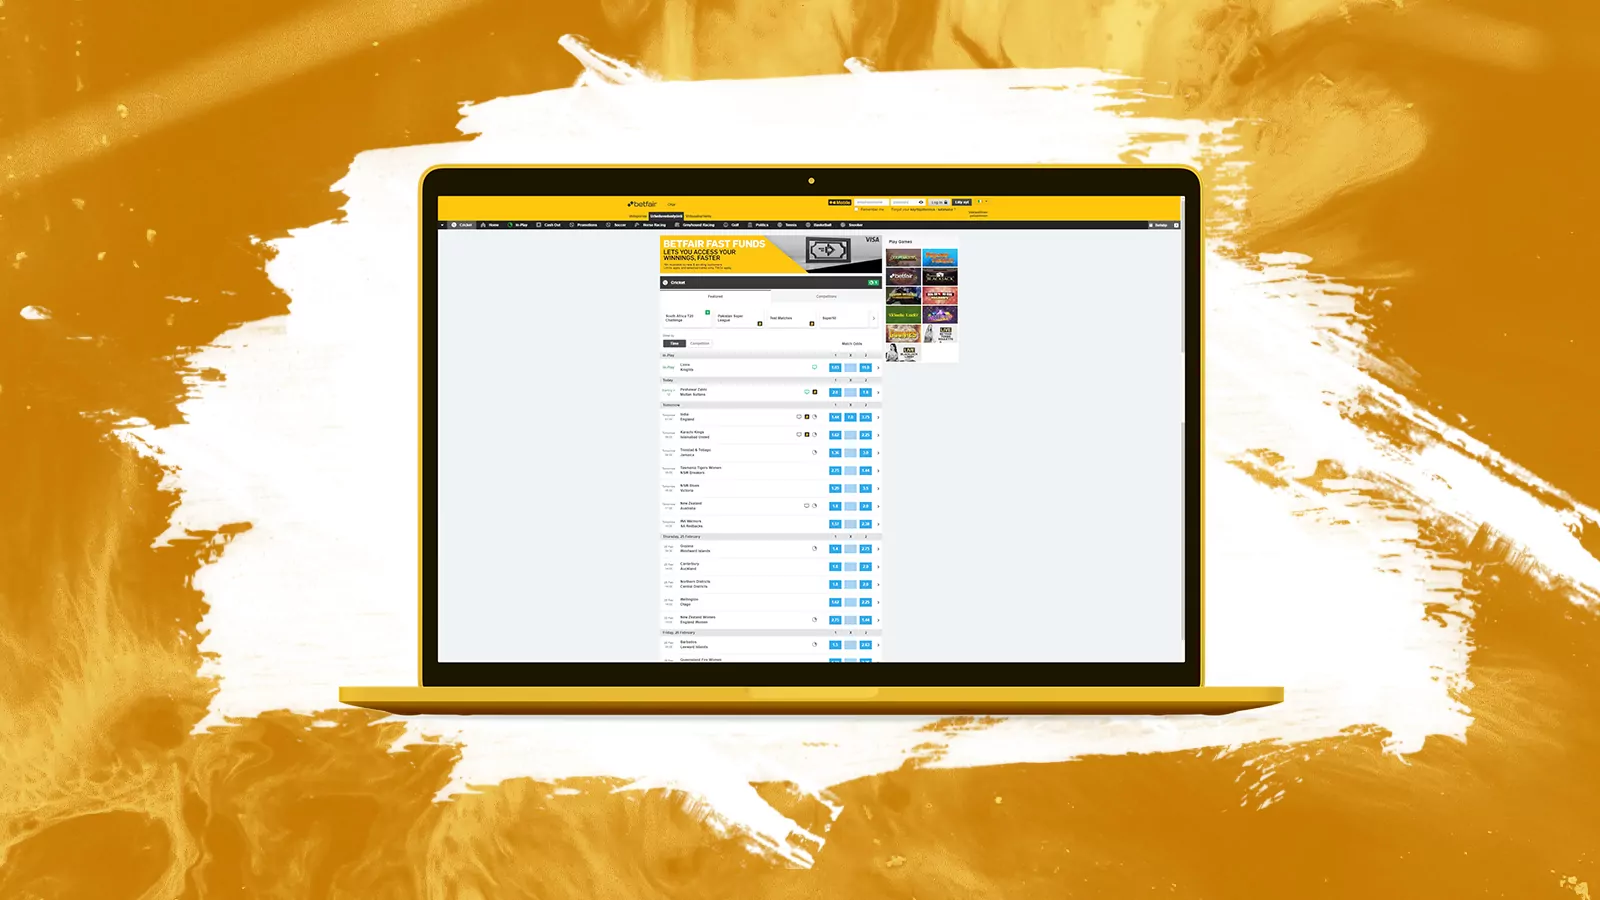 Betfair also has its own mobile app for more convenient betting on cricket.